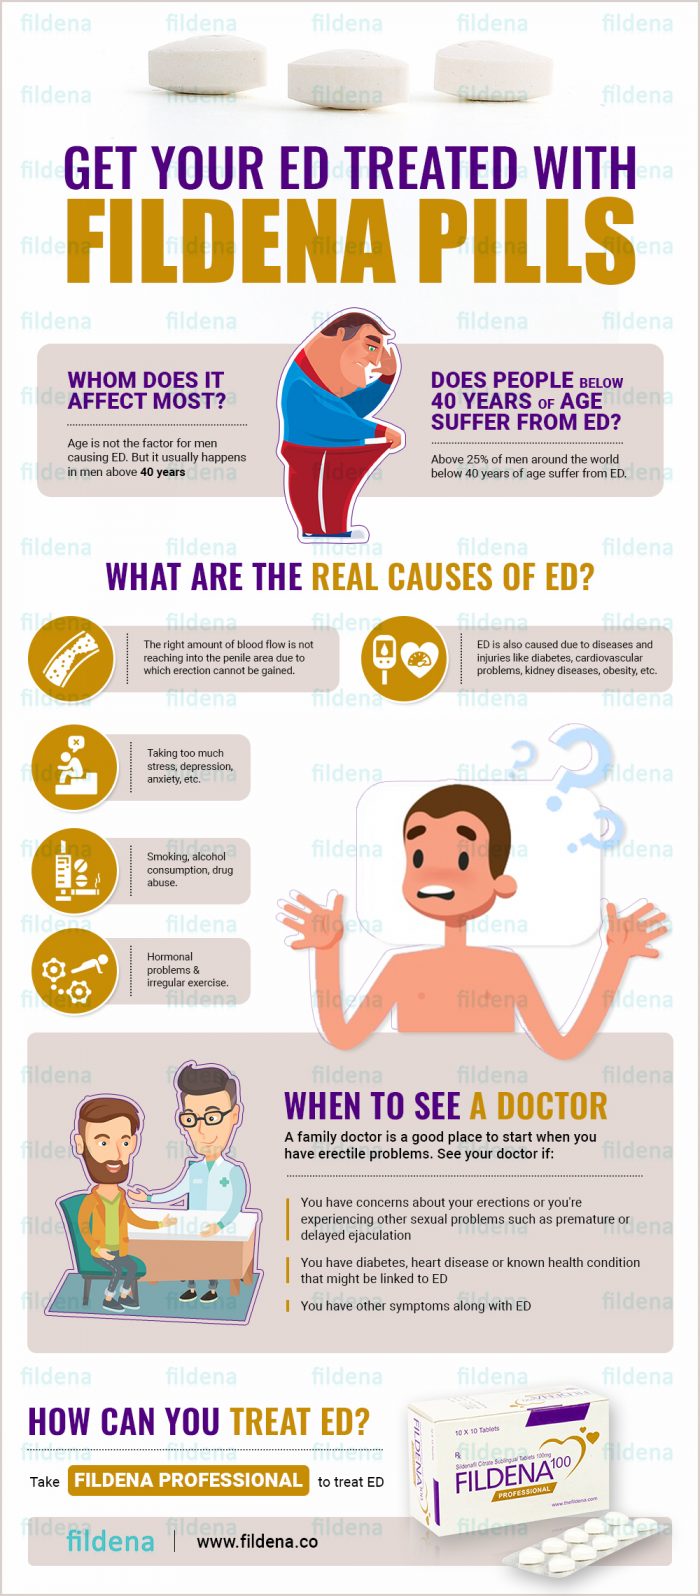 Right Diagnosis & Treatment is Essential in Treating ED